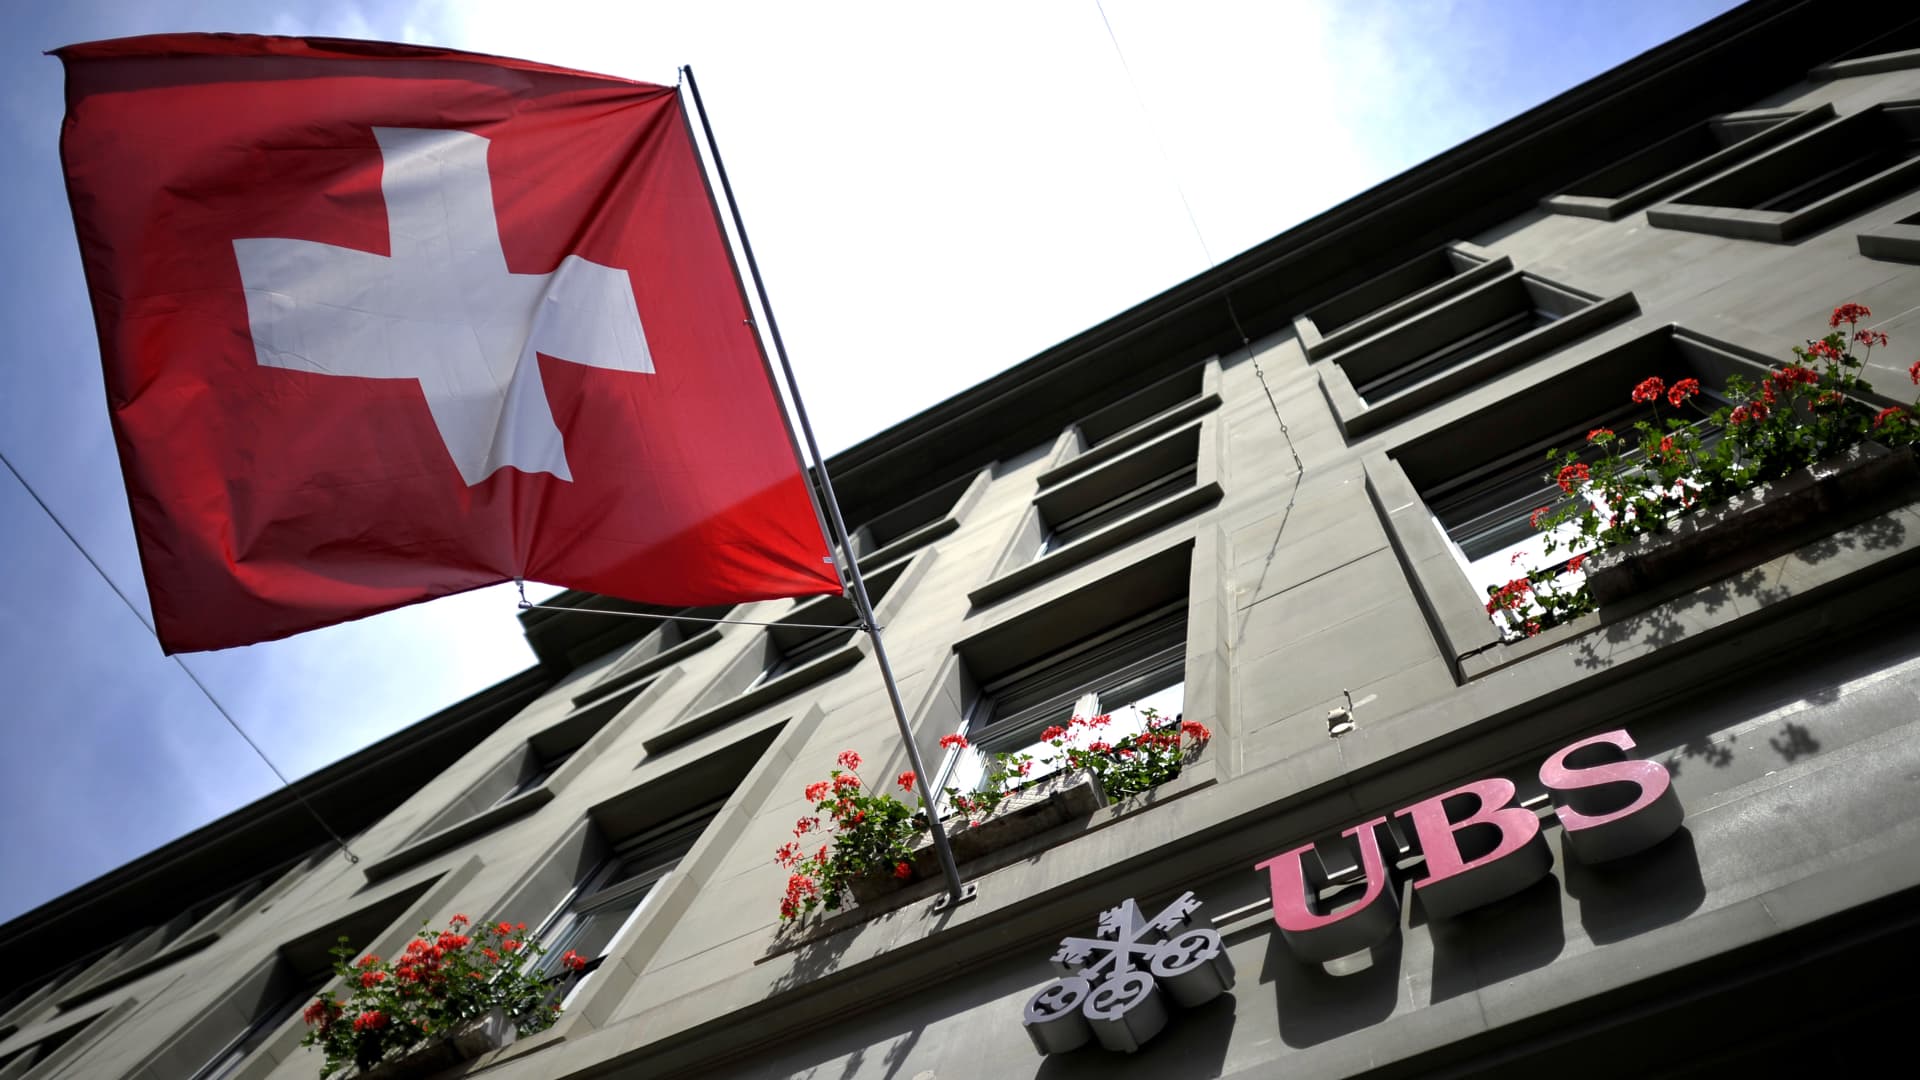 'A financial banana republic': UBS-Credit Suisse deal puts Switzerland's reputation on the line - CNBC